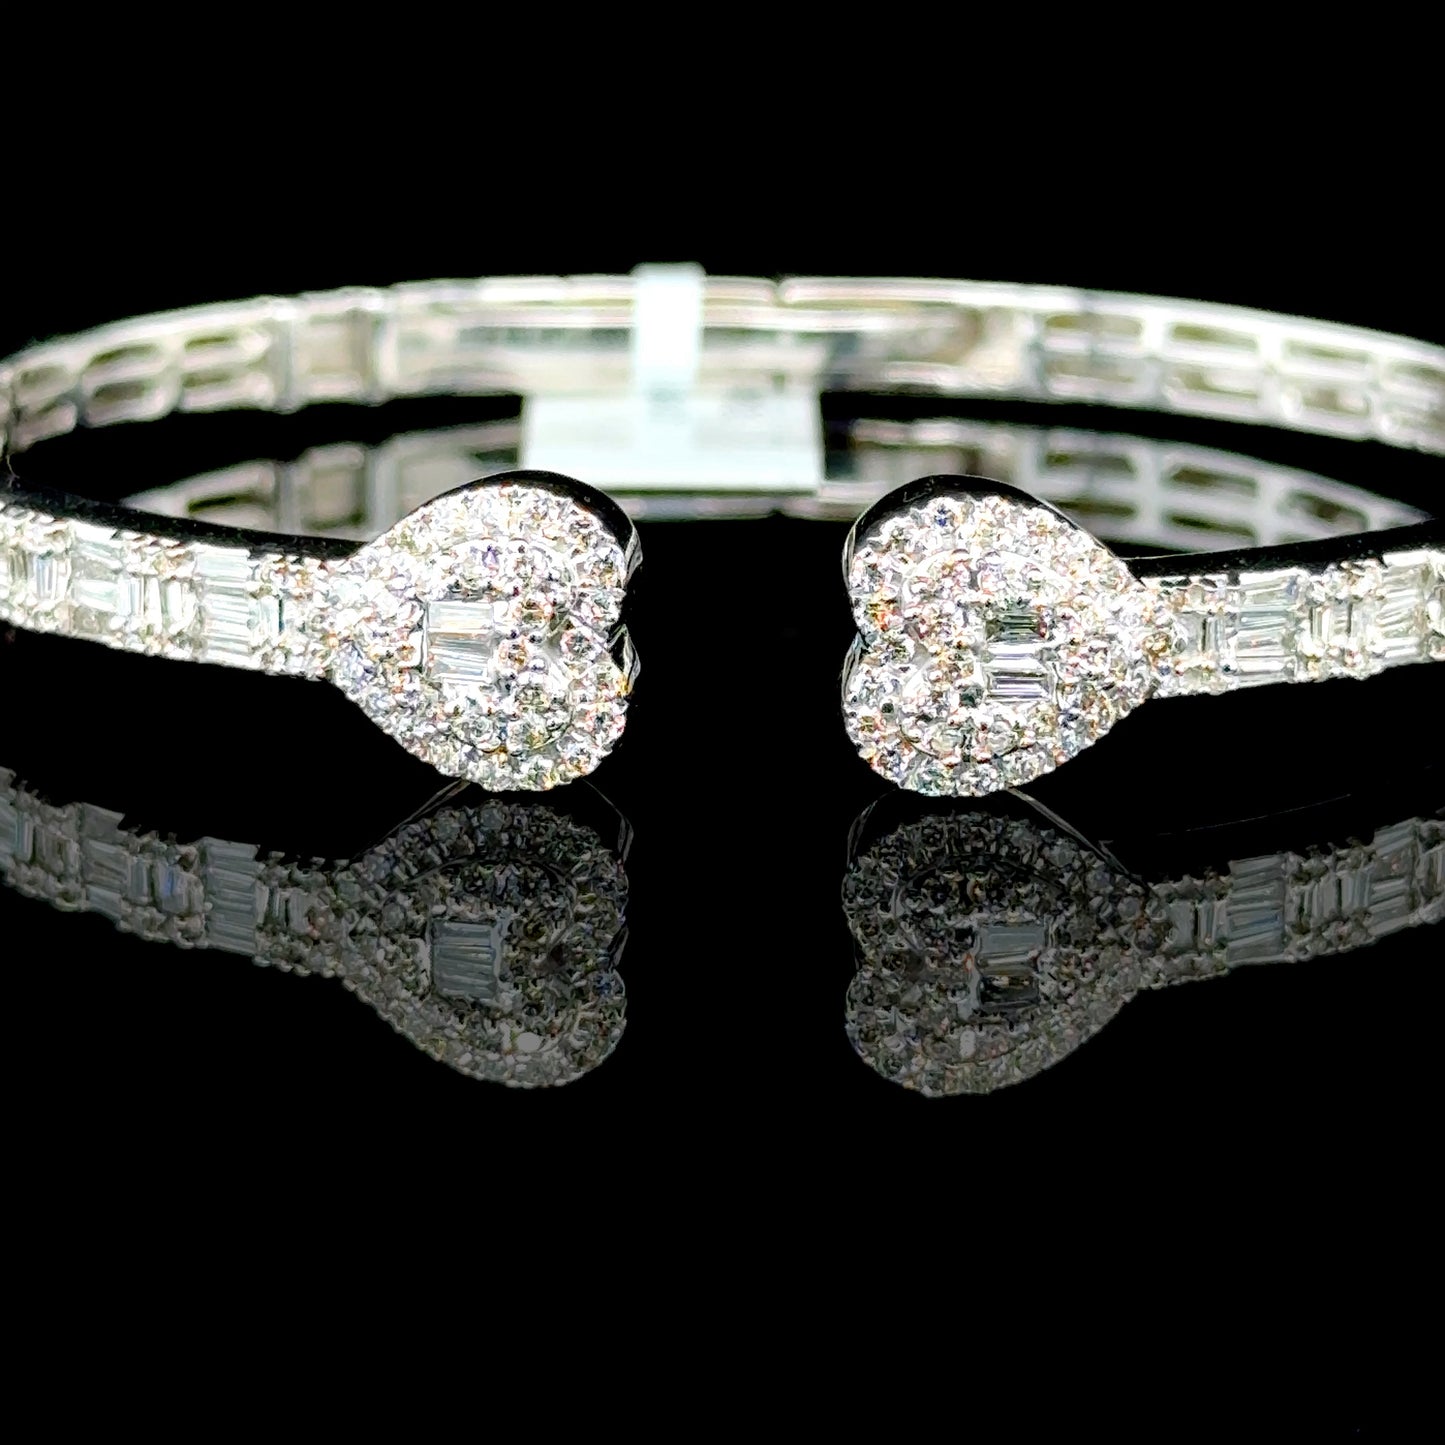 Heart-shaped bangle with 1.83 carats of diamonds set in white gold